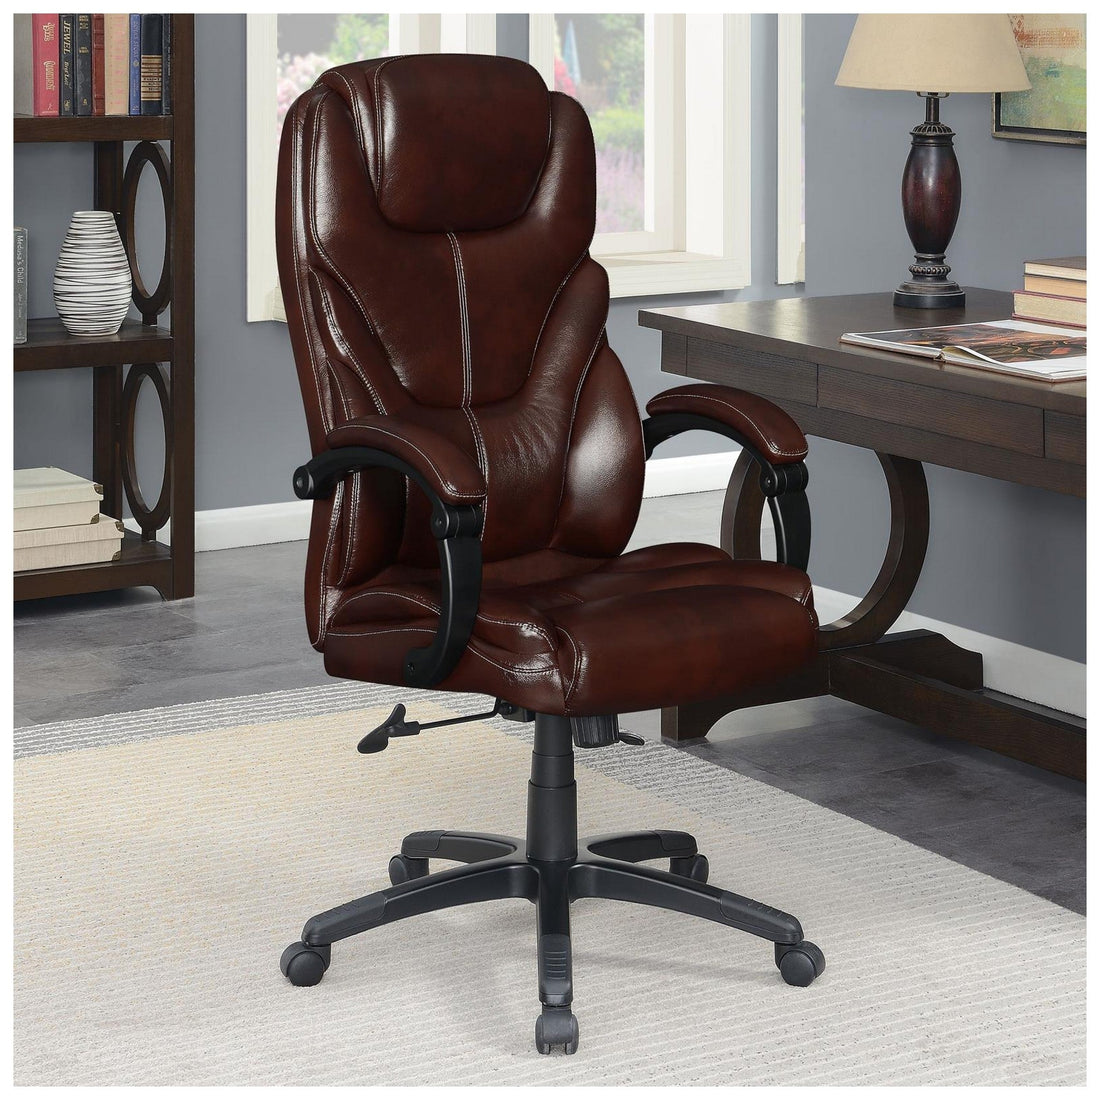 Upholstered Curved Arm Office Chair Brown and Black 802258